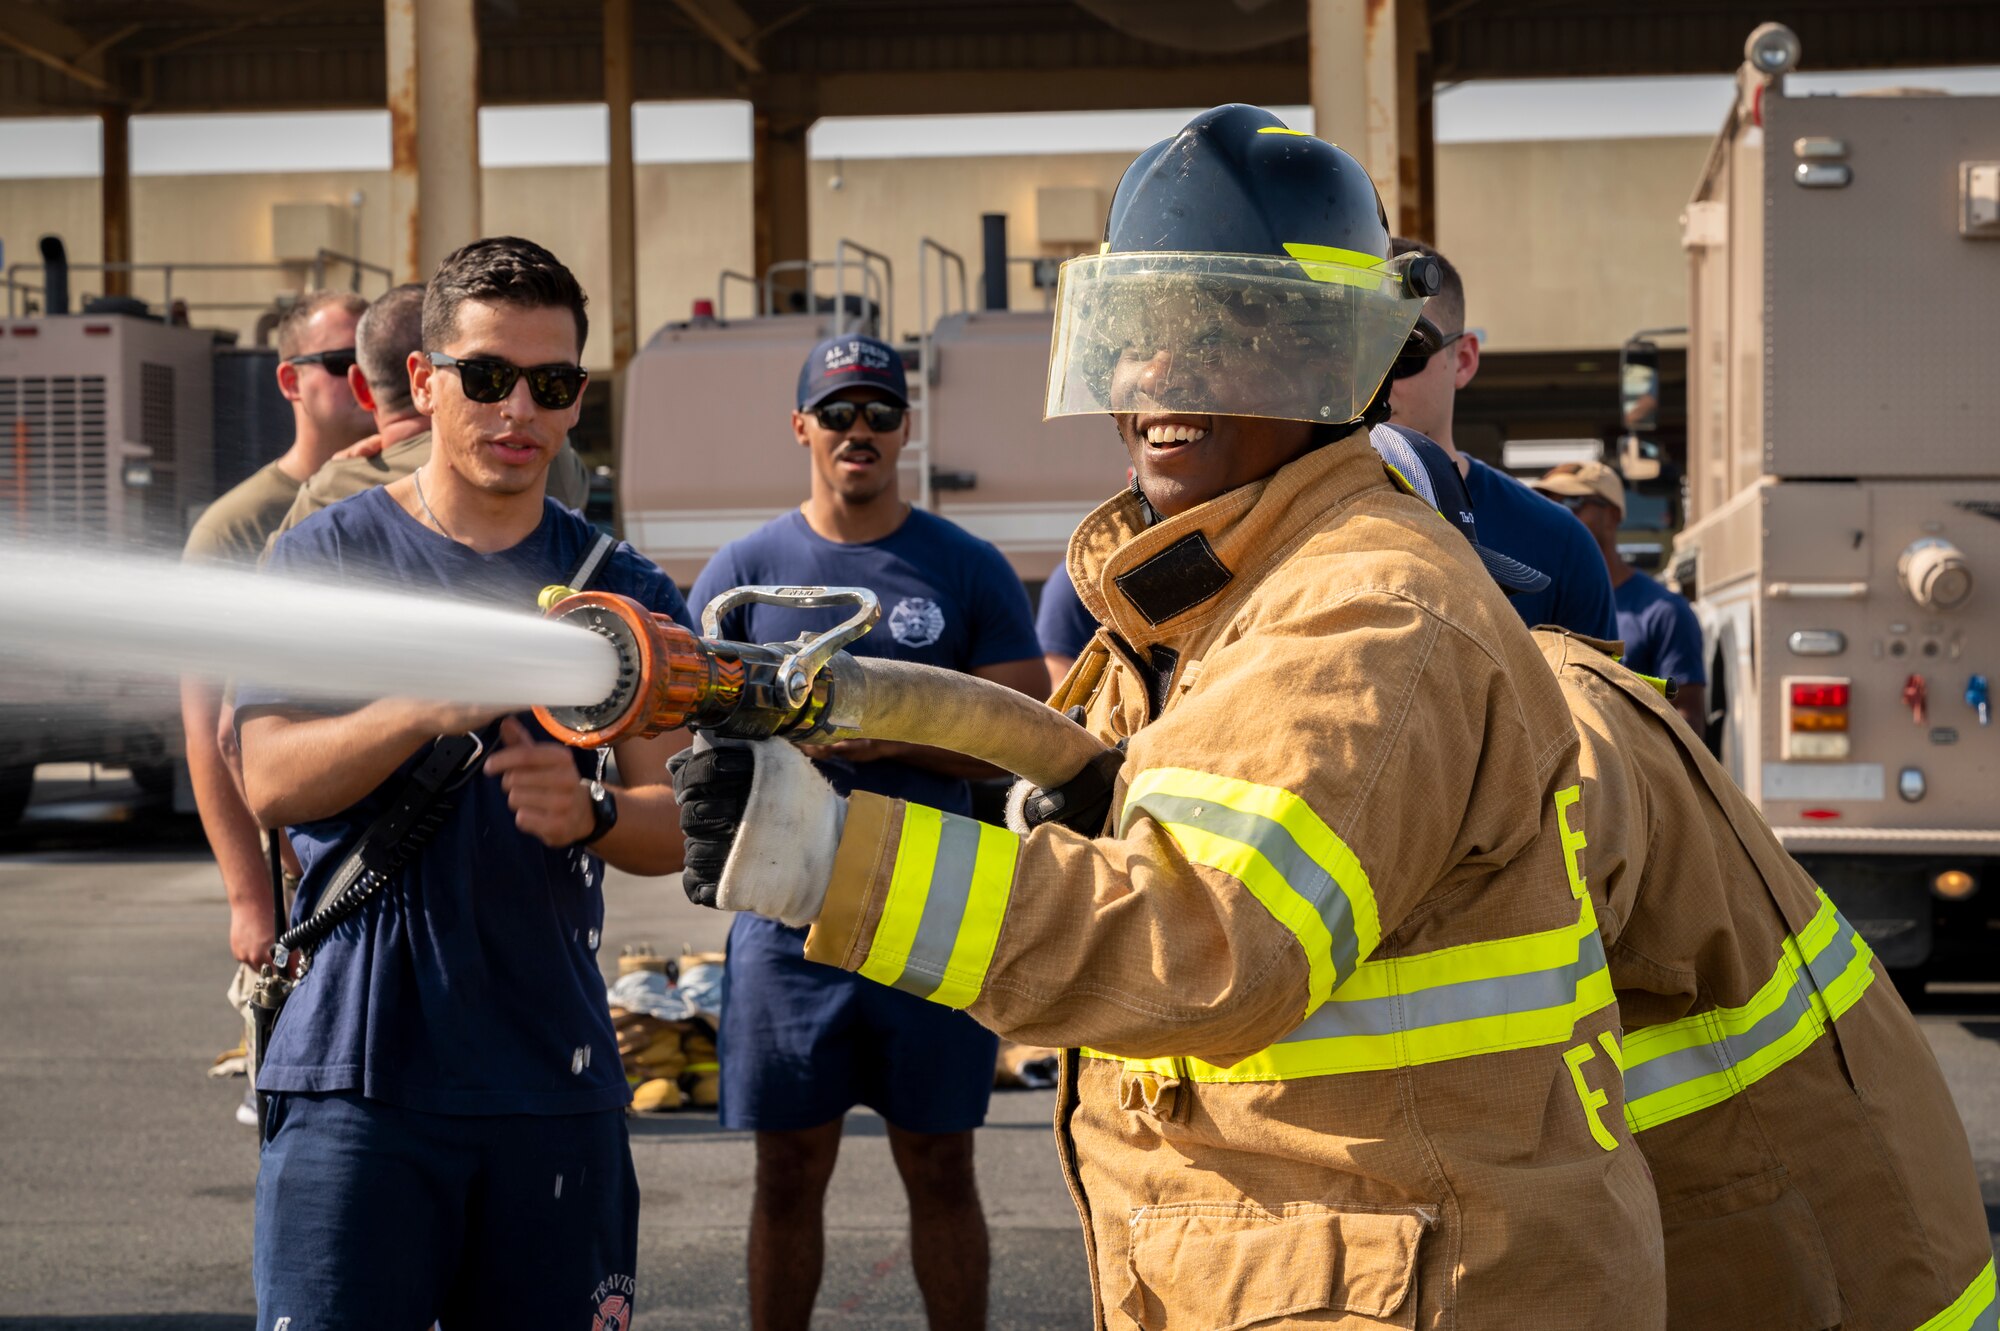 U.S. Air Force Senior Airman Tatiana Allen, 379th Expeditionary Civil Engineer Squadron resource advisor, shoots a firehose during a Firefighter for a Day initiative at Al Udeid Air Base, Qatar, Nov. 27, 2021.